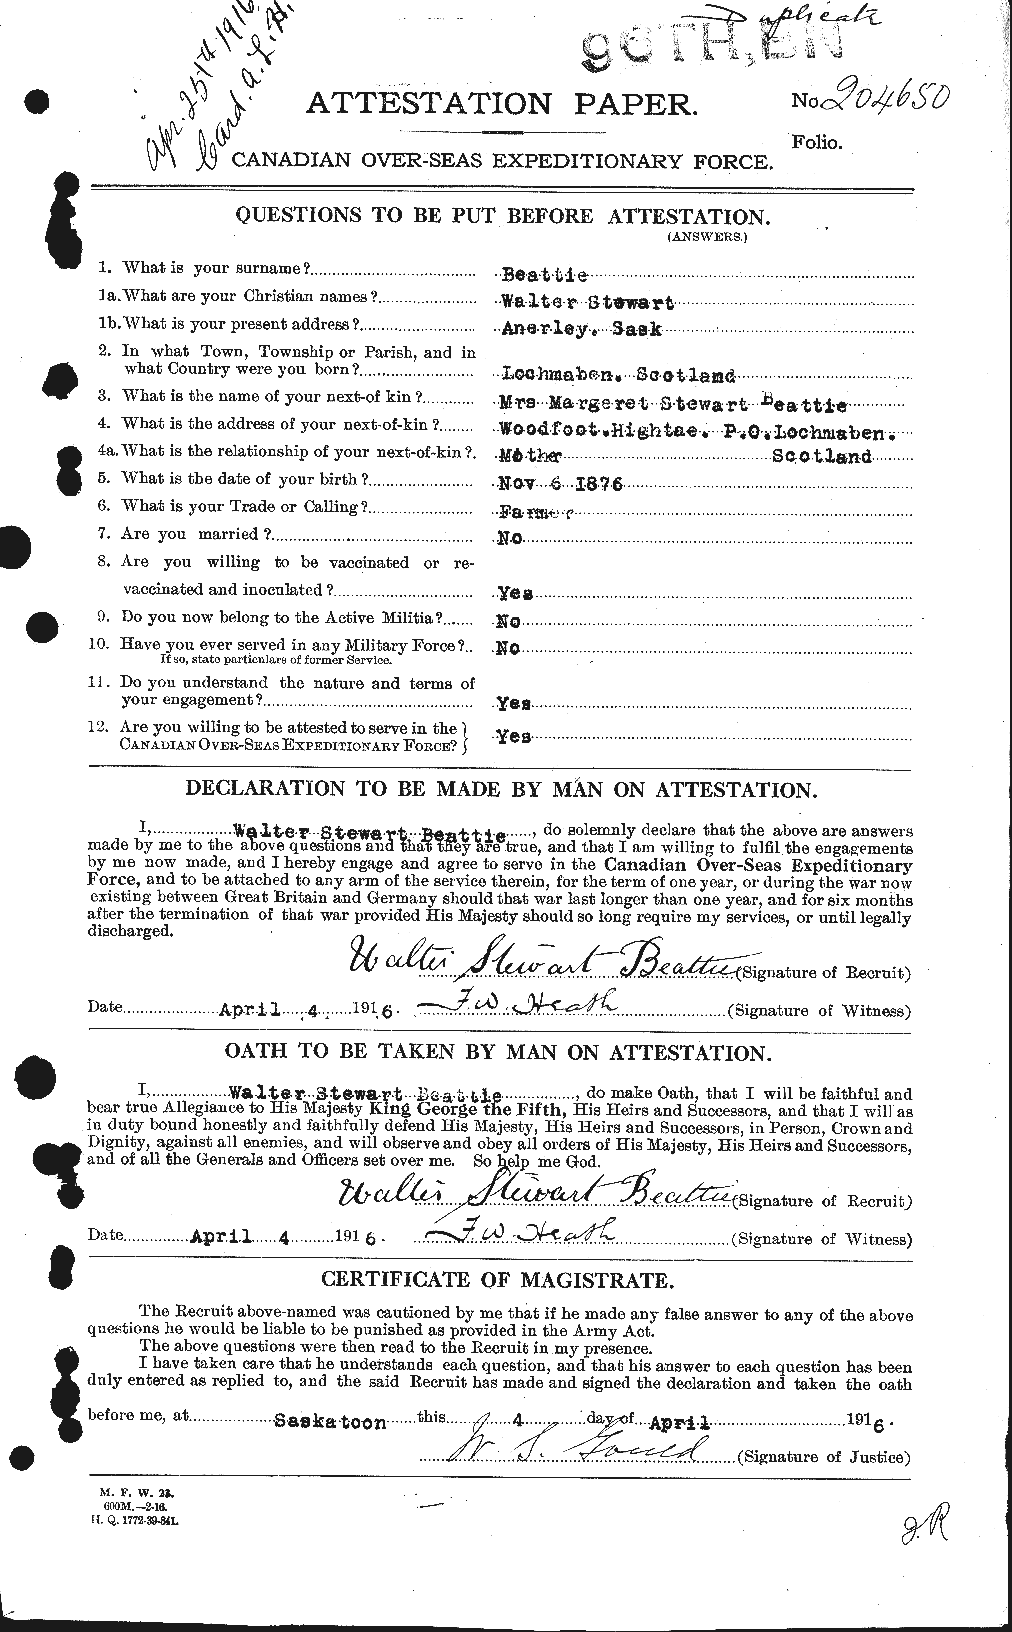 Personnel Records of the First World War - CEF 230817a